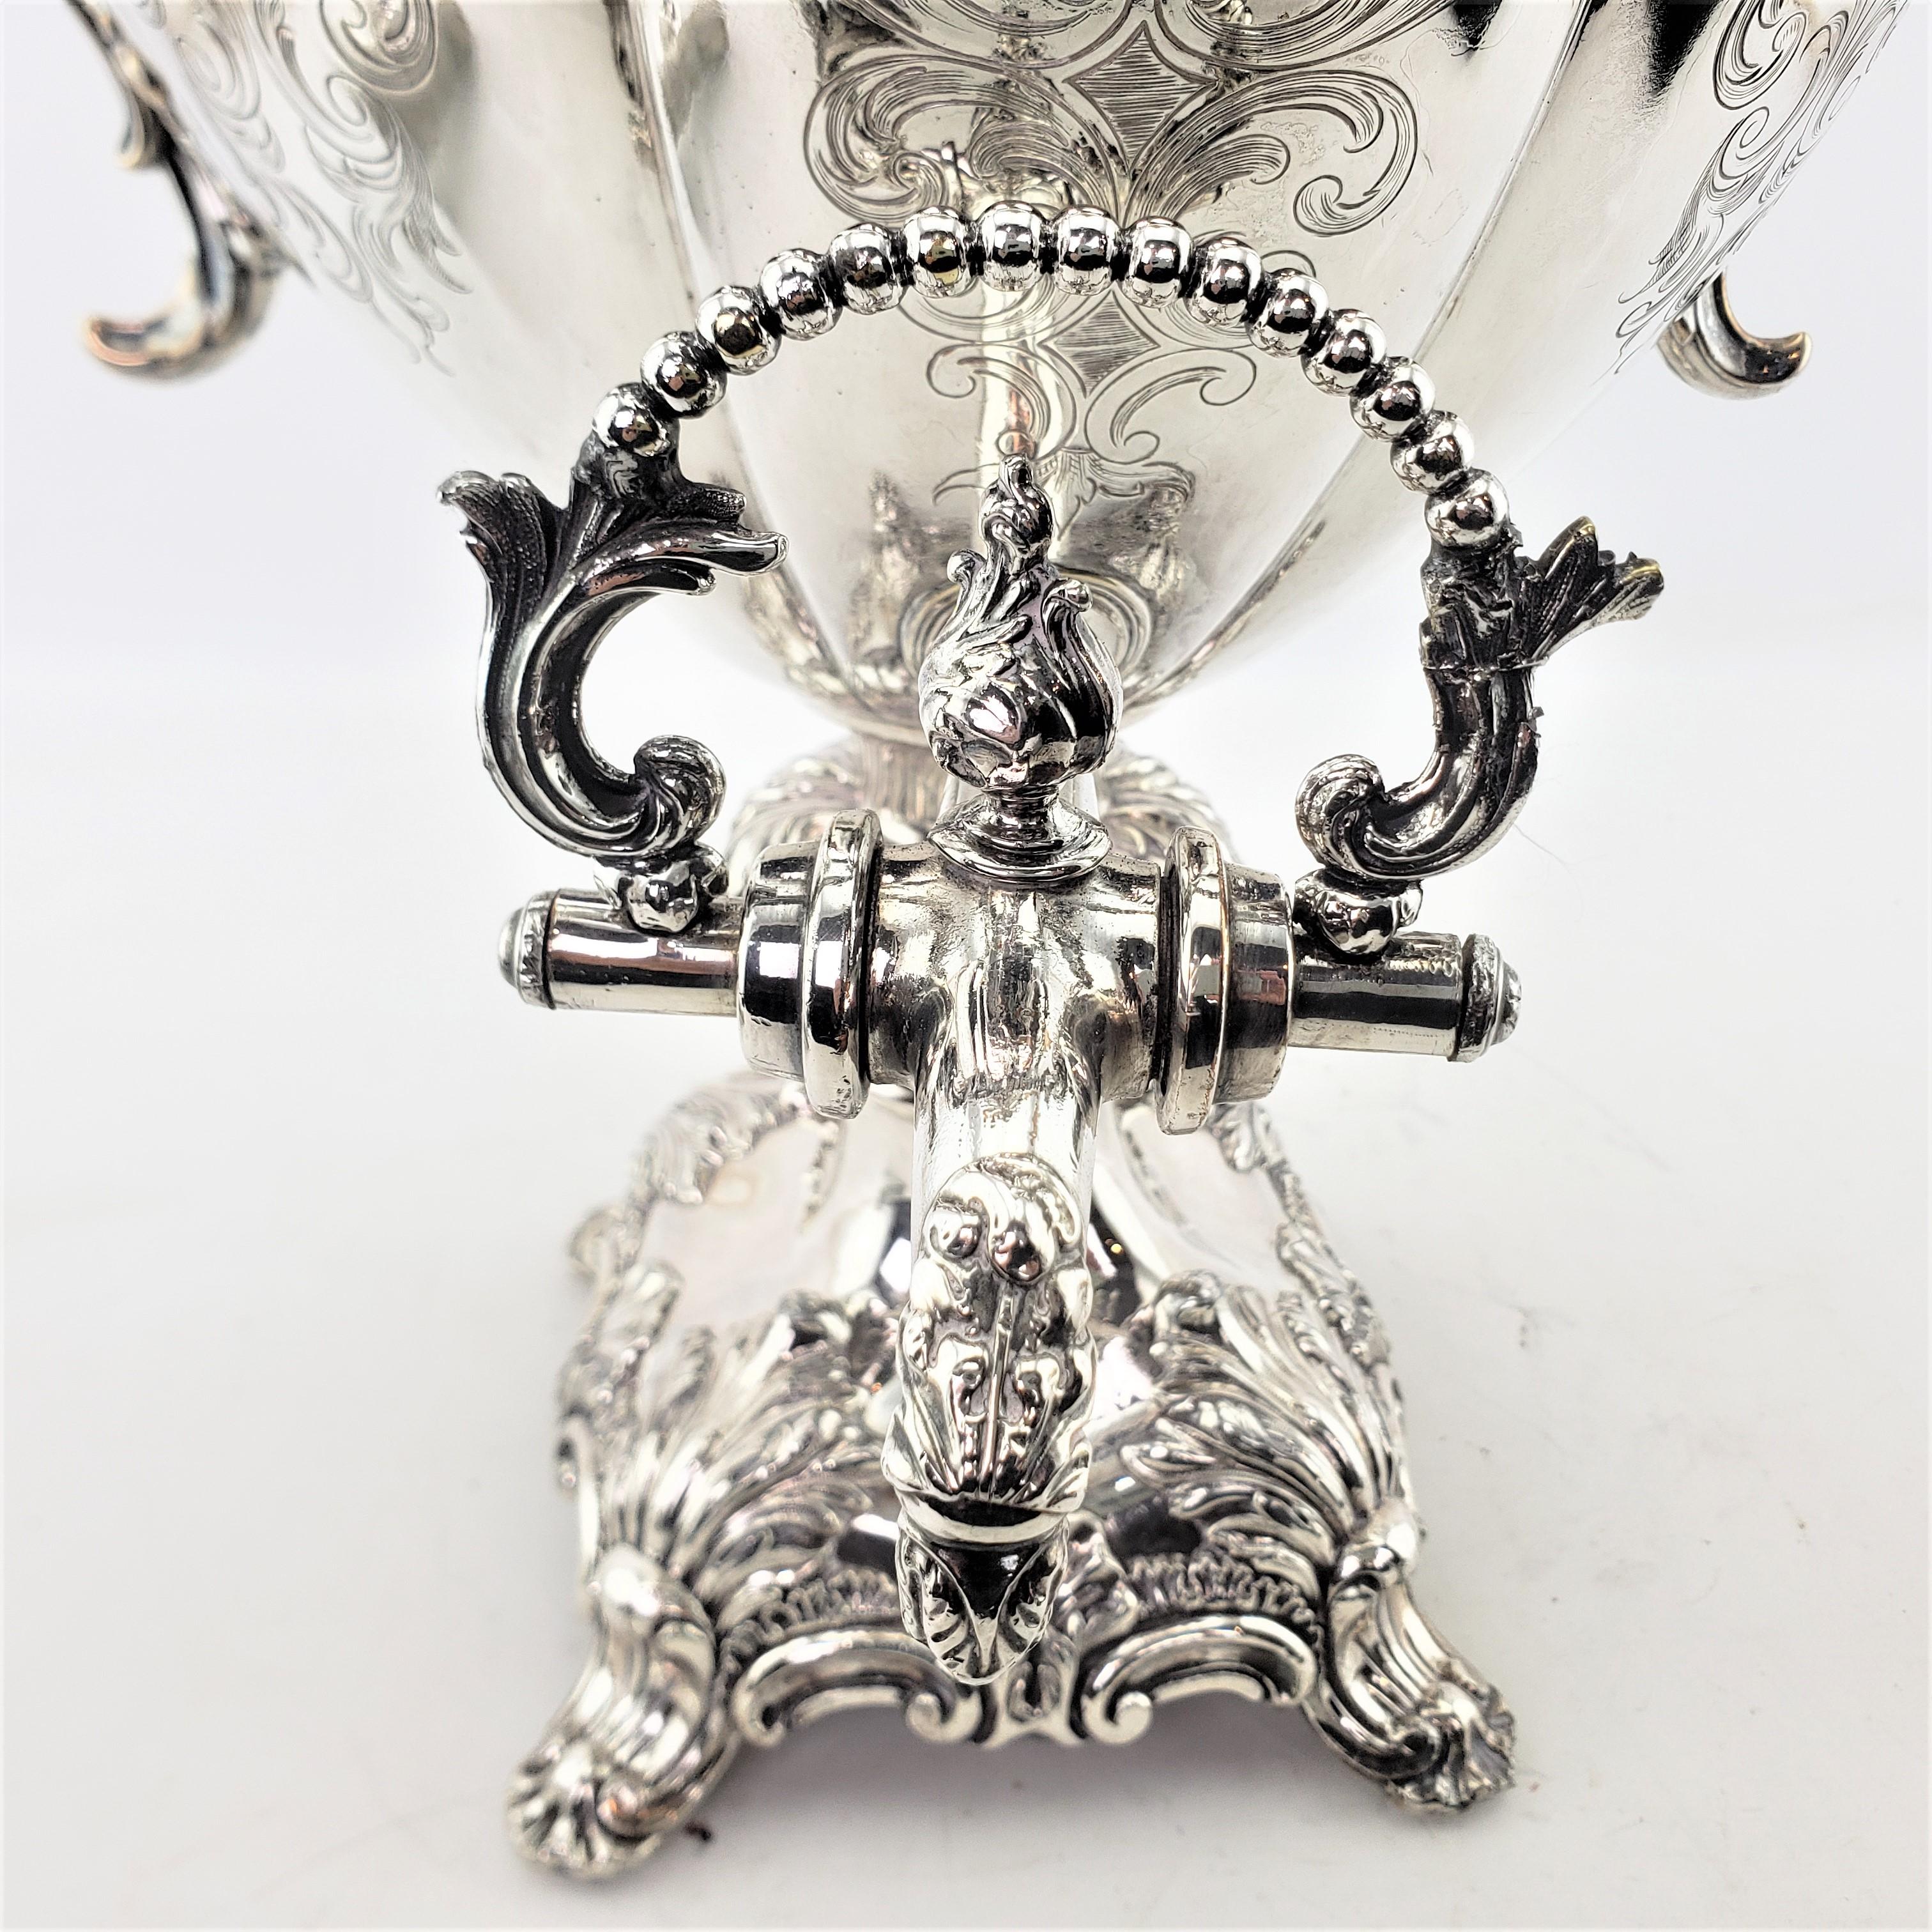 Antique Early Victorian Silver Plated Tea or Hot Water Urn with Floral Engraving For Sale 5